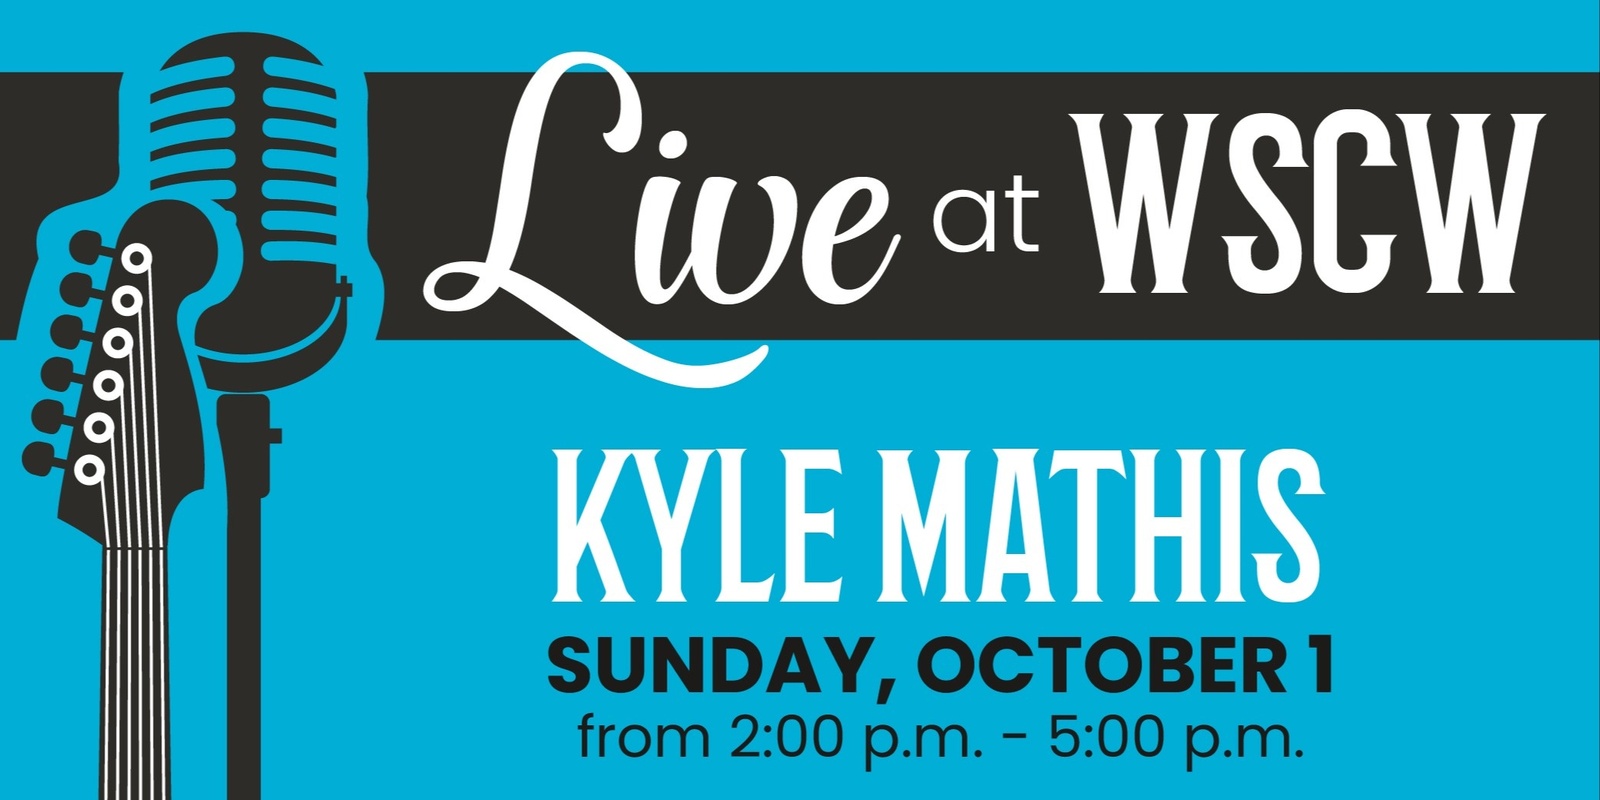 Banner image for Kyle Mathis Live at WSCW October 1